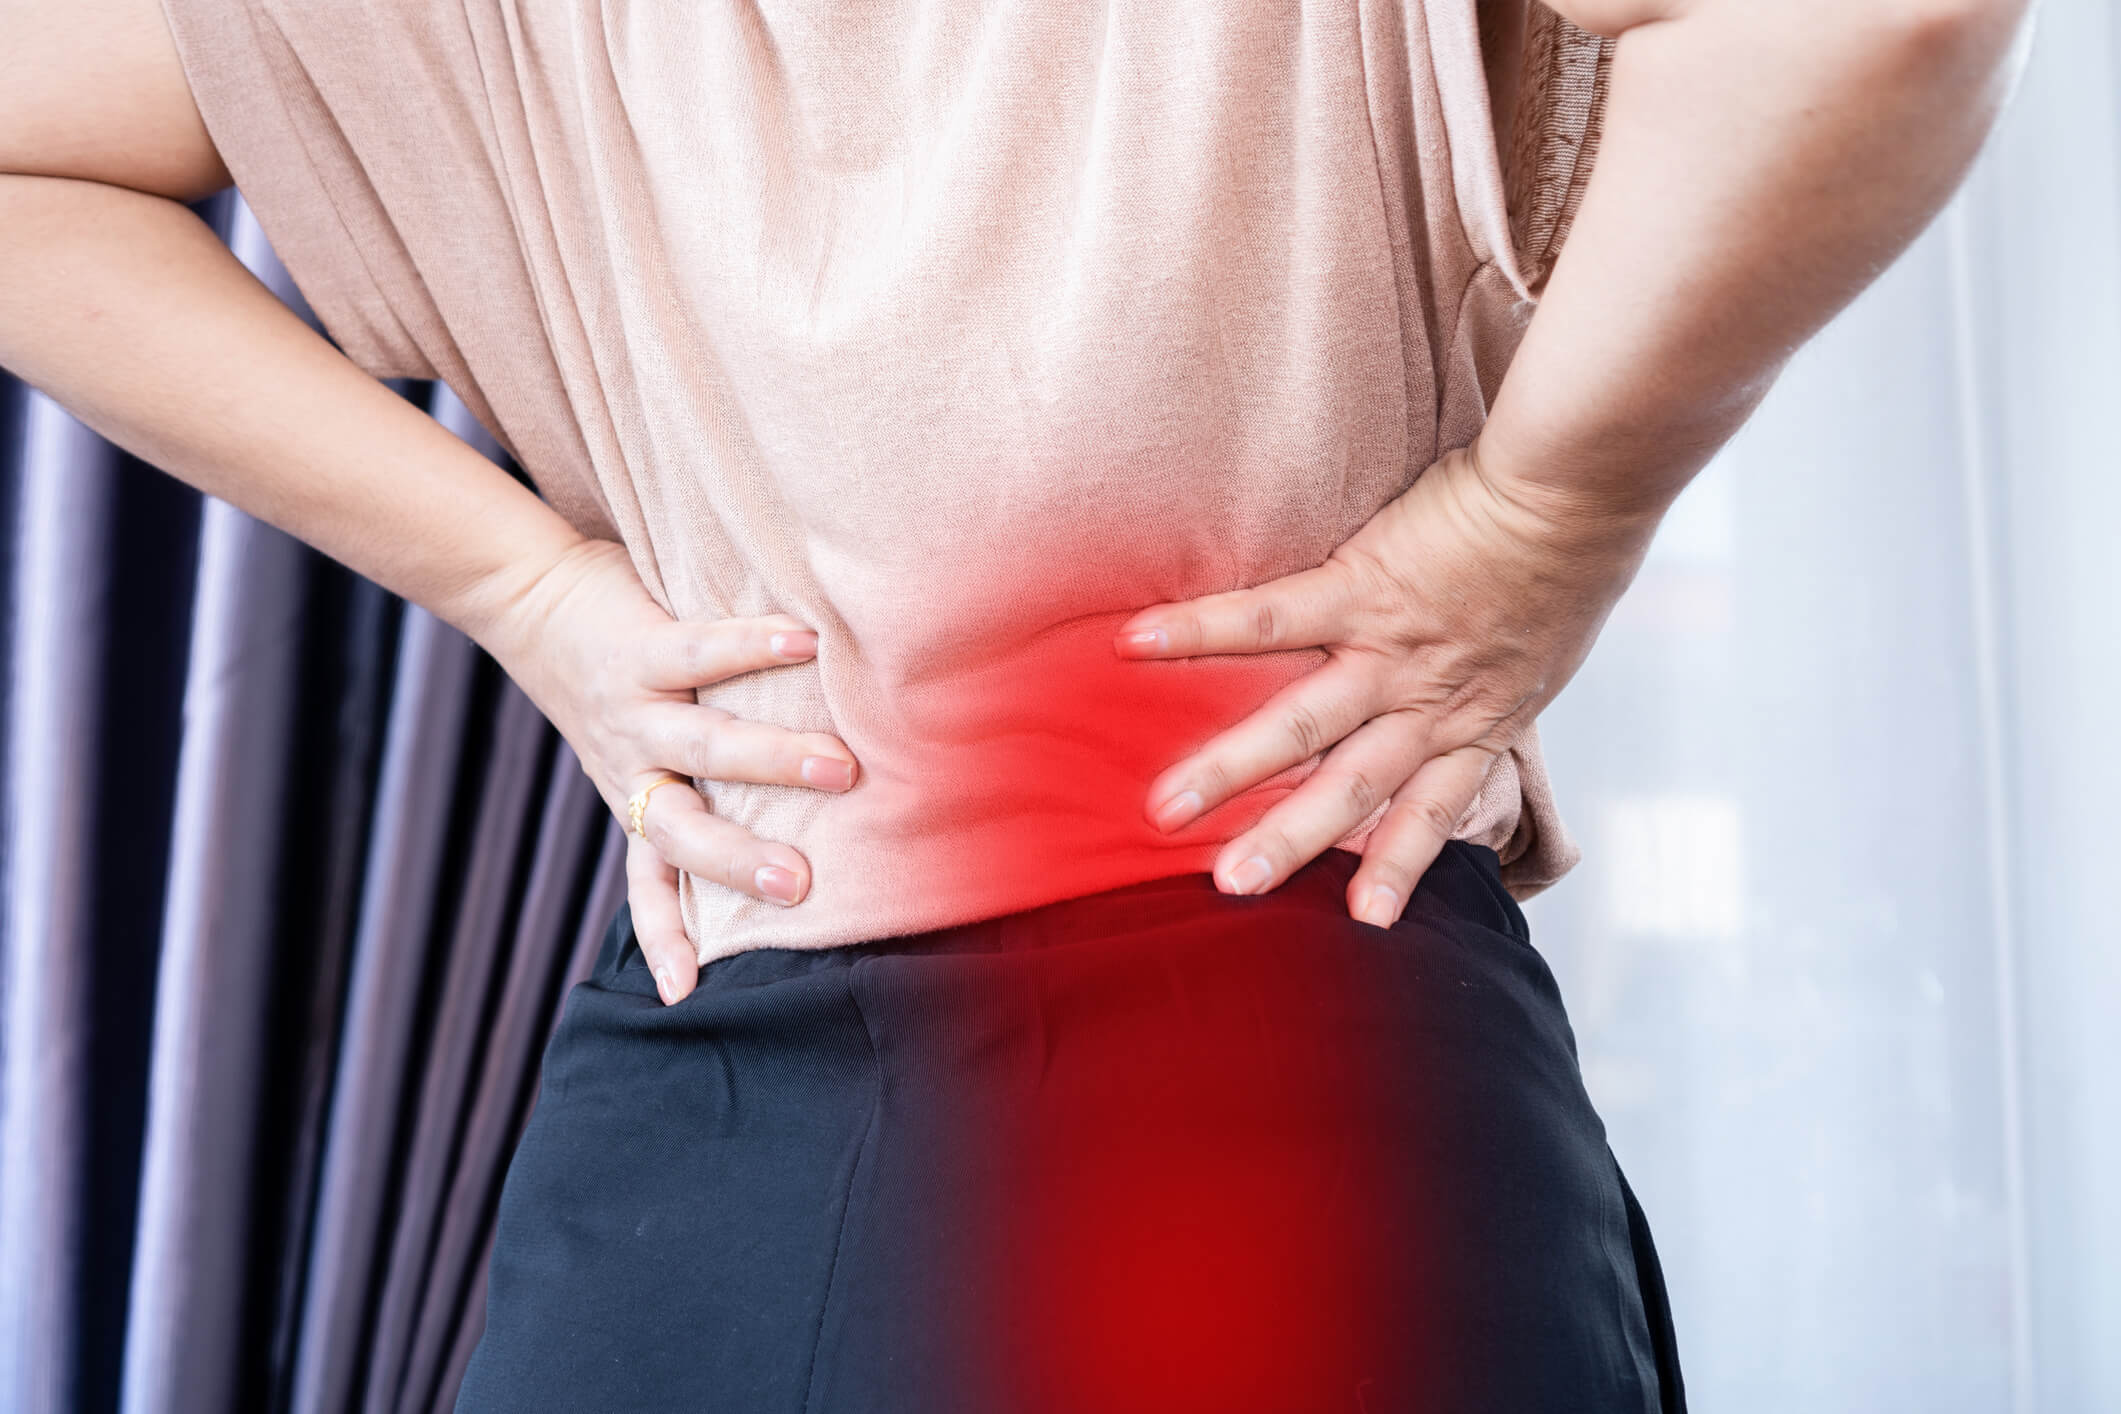 The Pain Scale of Back Pain - Florida Surgery Consultants